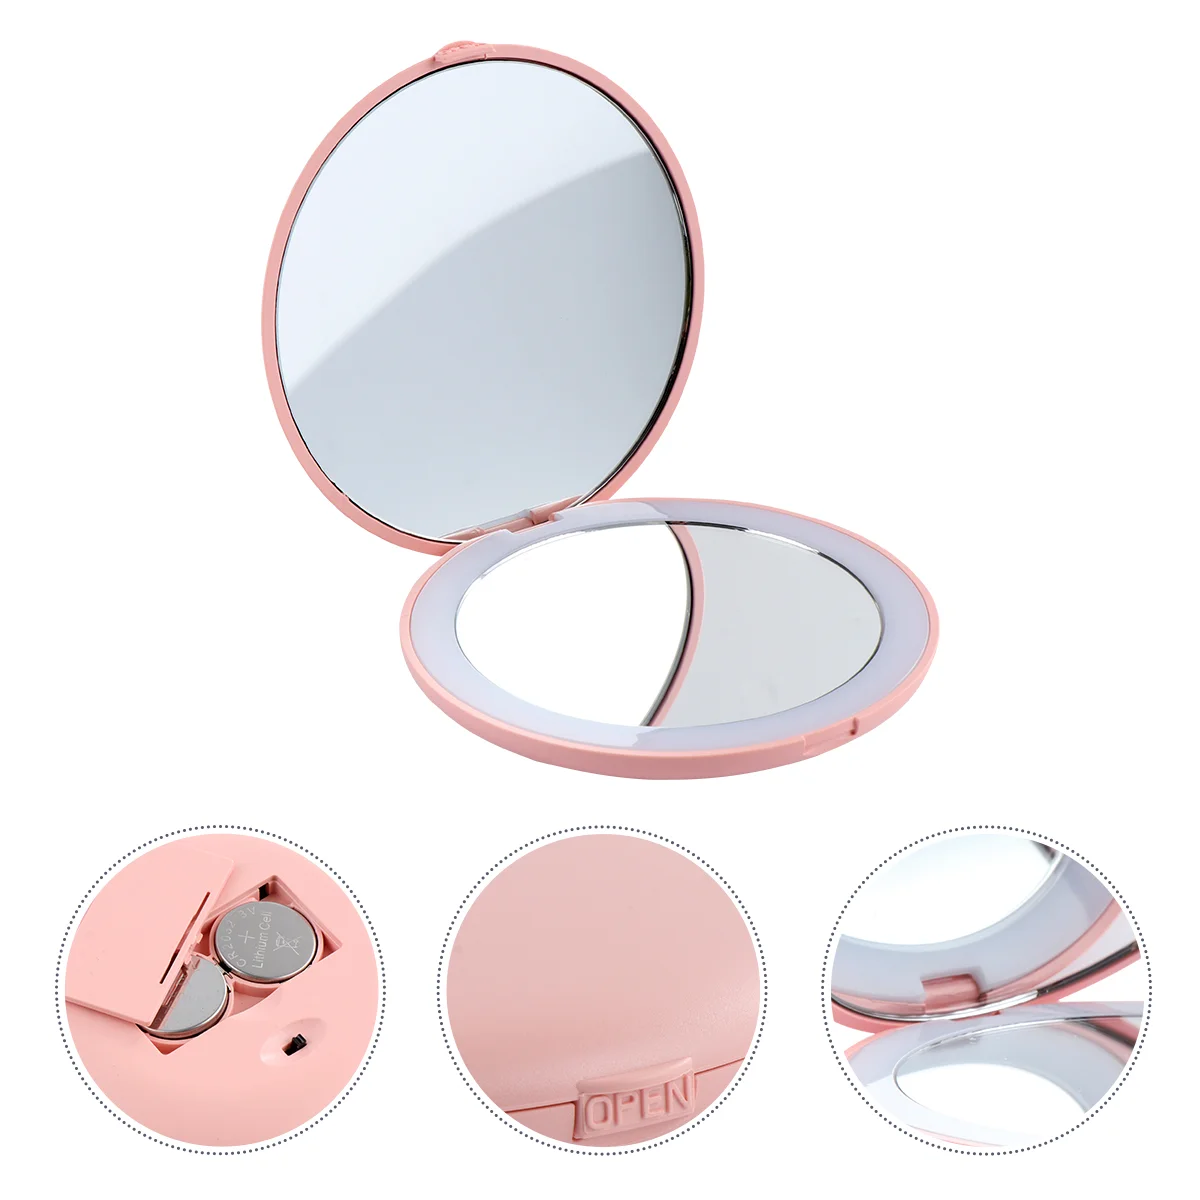 

10 Times Magnifying Makeup Mirror Small Travel Wallet Glass LED Light Folding Aluminum Round Pocket Looking Mini